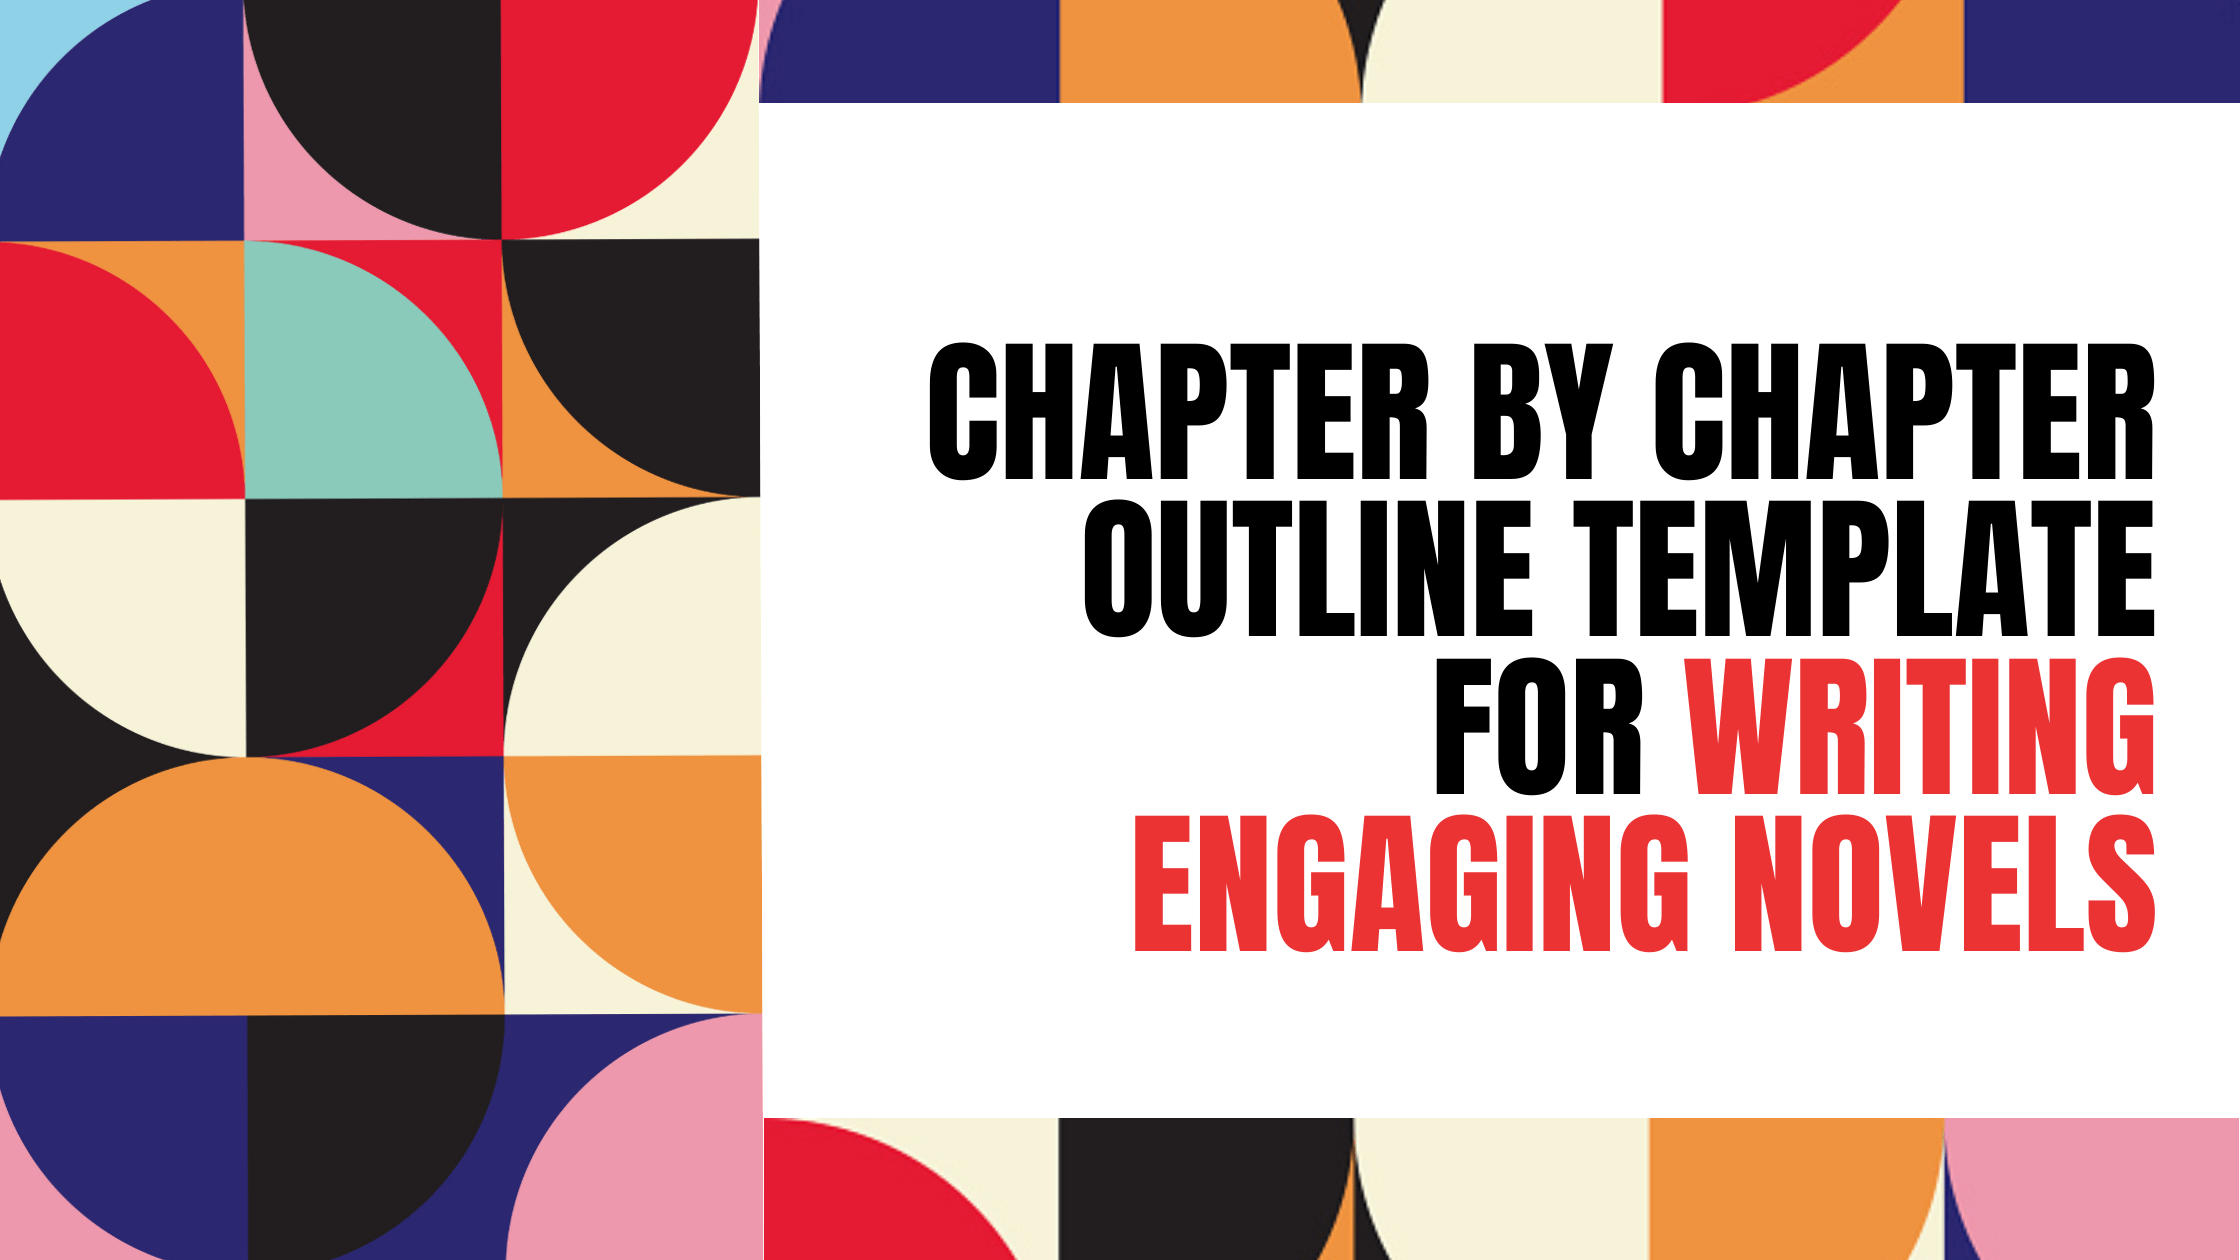 Chapter by Chapter Outline Template for Writing Engaging Novels